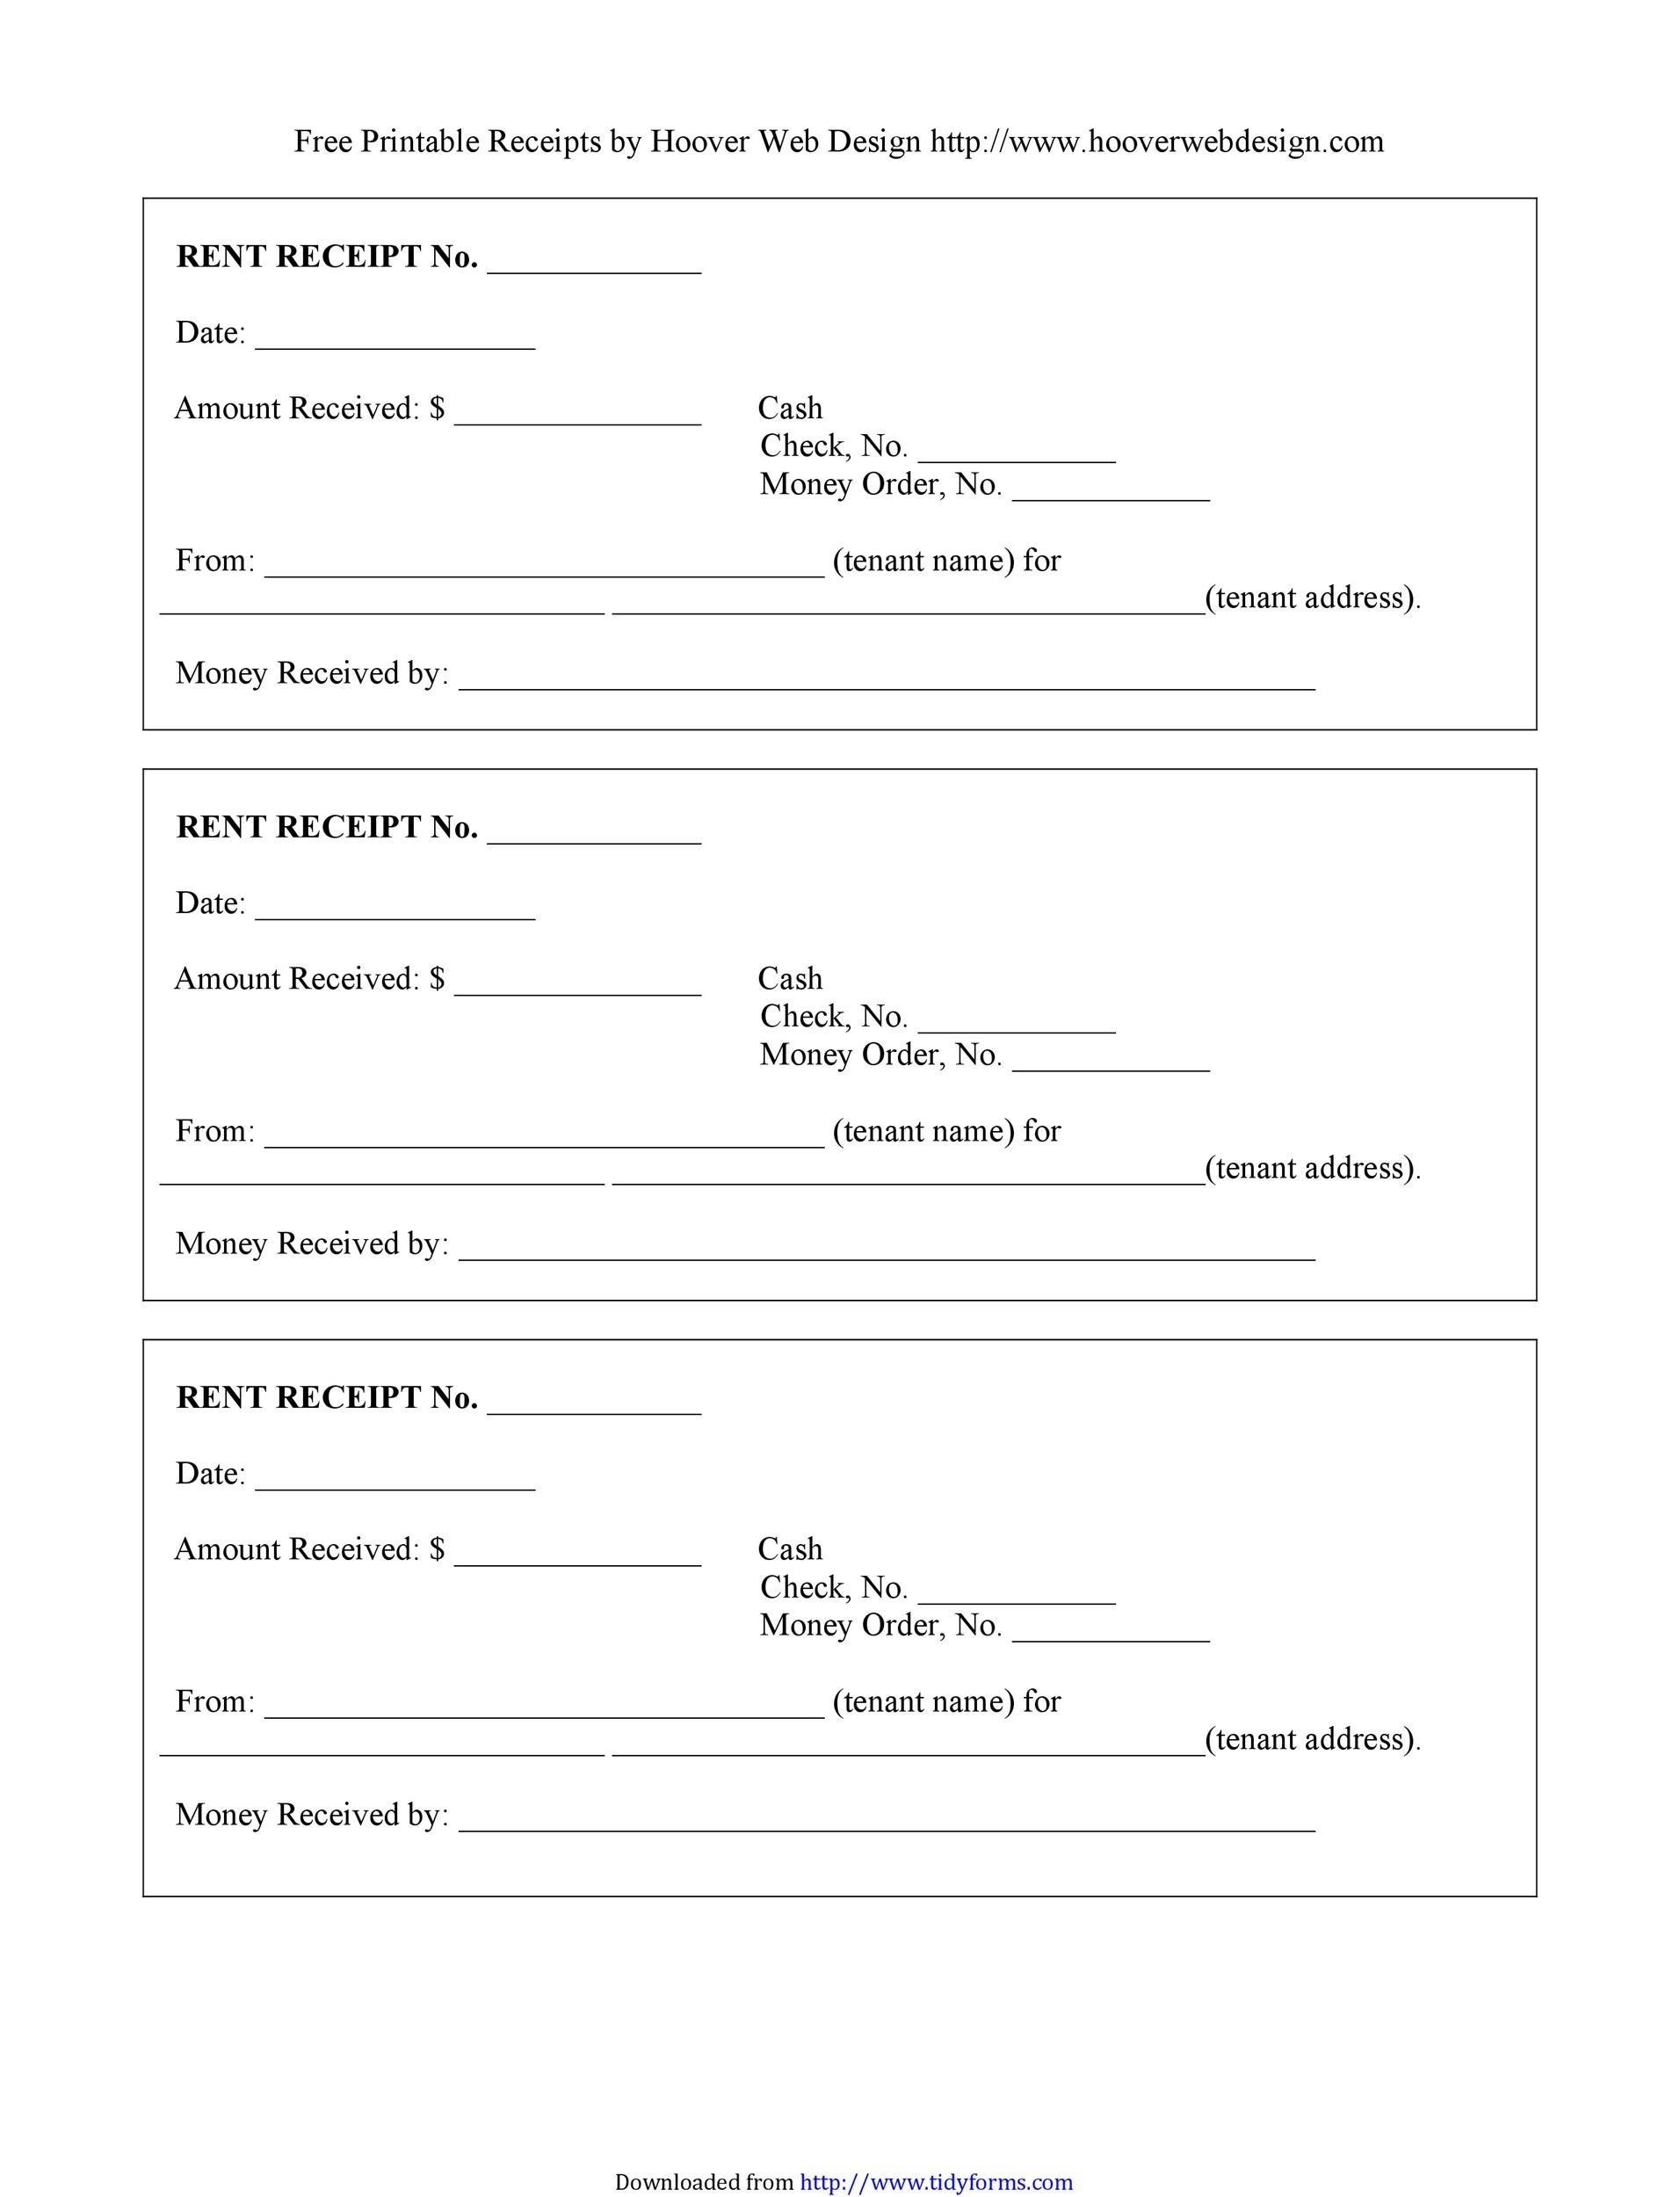 rent-receipt-template-fill-out-sign-online-and-download-pdf-free